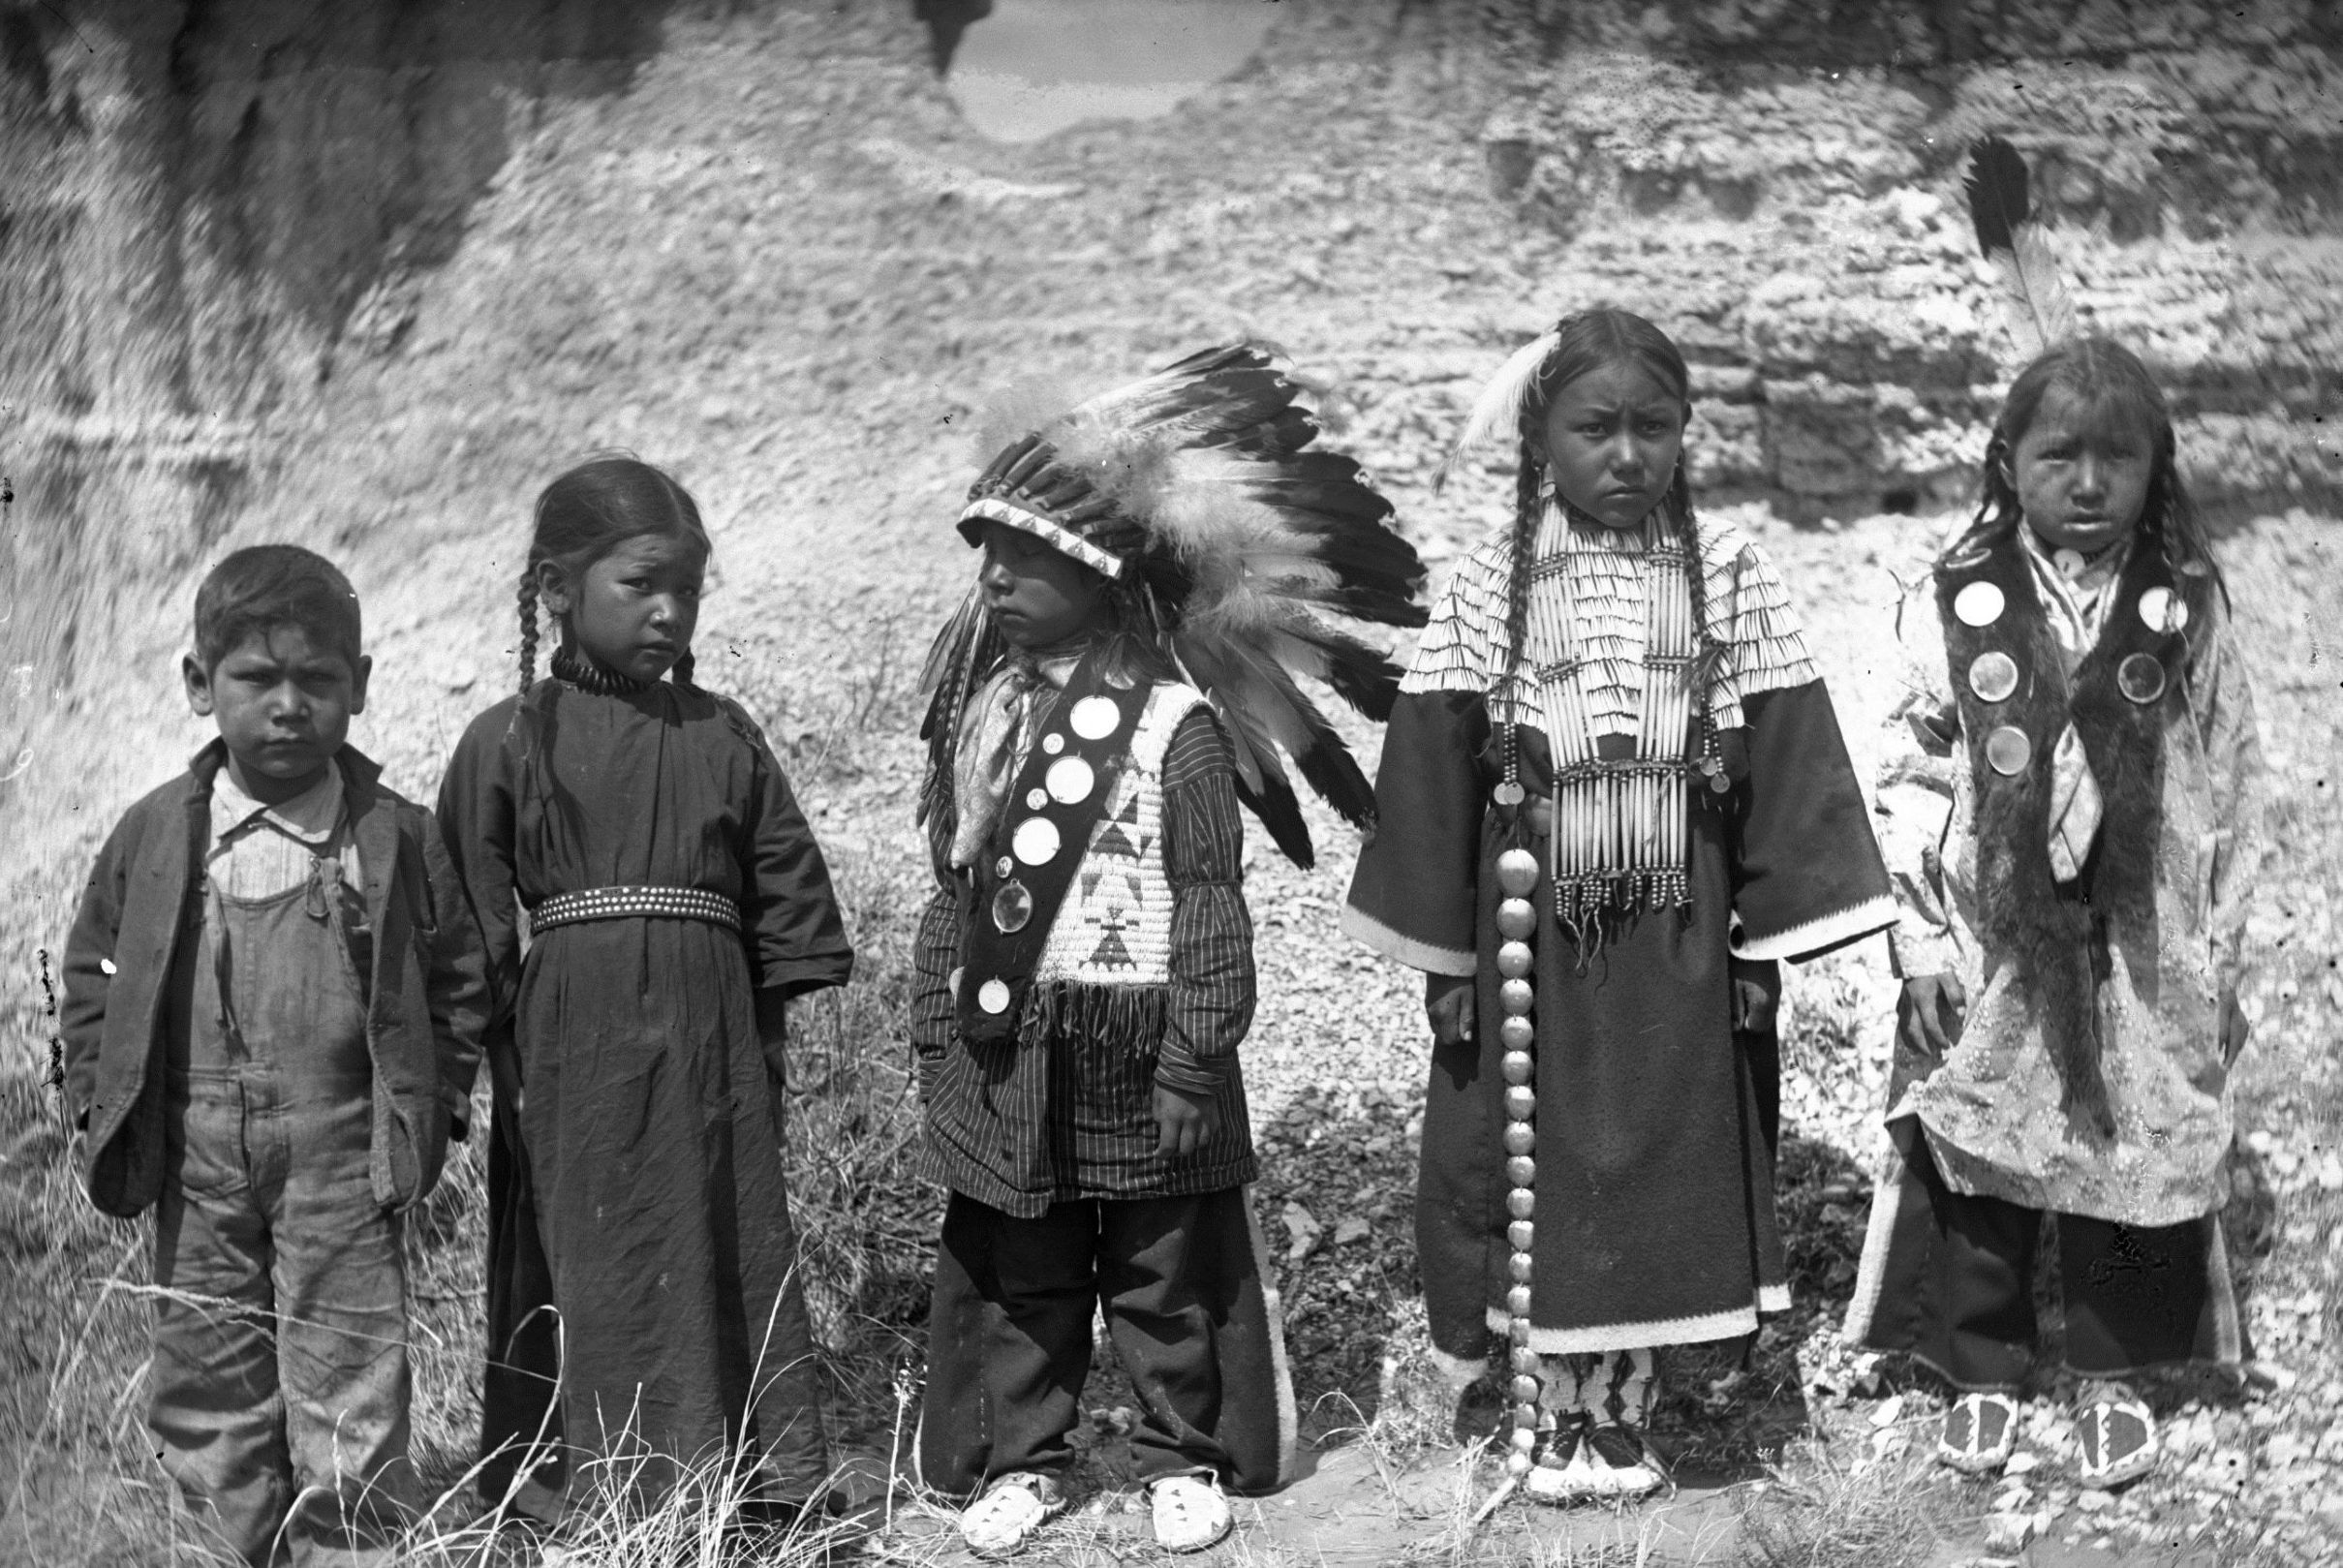 Native American Childrens Historic Forced Assimilation